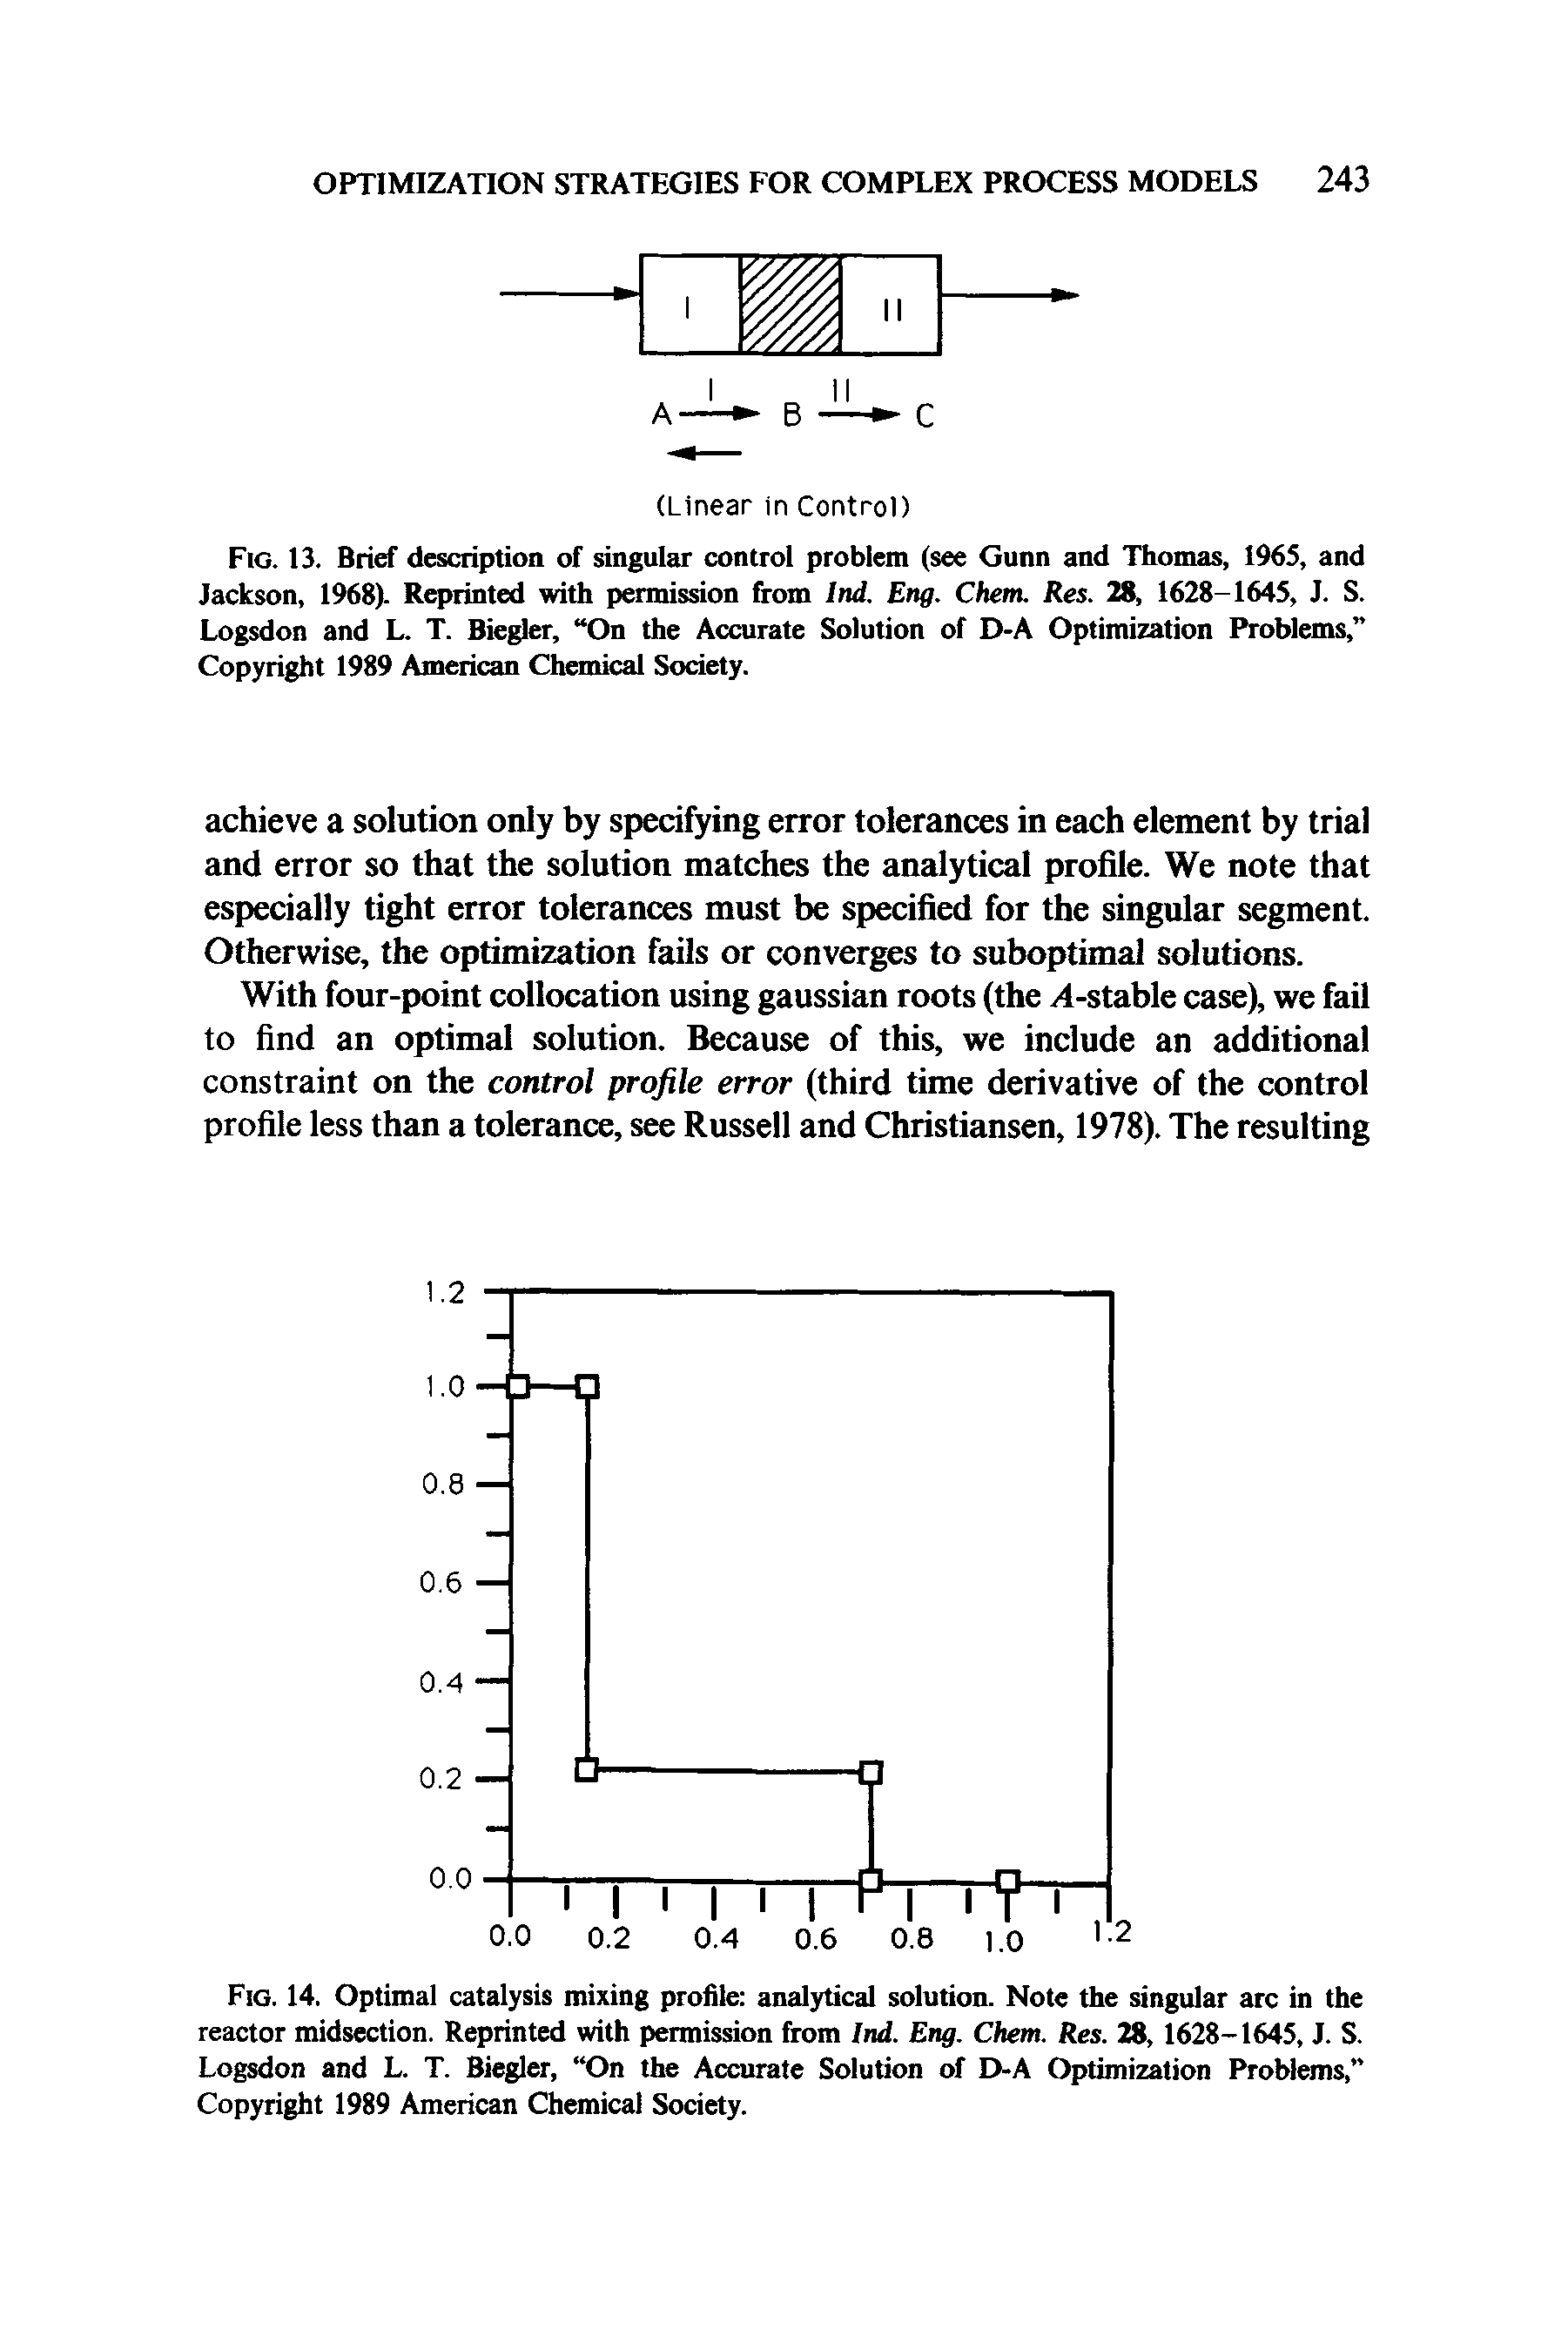 Fig. 13. Brief description of singular control problem (see Gunn and Thomas, 1965, and Jackson, 1968). Reprinted with permission from Ind. Eng. Chem. Res. 28, 1628-1645, J. S. Logsdon and L. T. Biegler, On the Accurate Solution of D-A Optimization Problems, Copyright 1989 American Chemical Society.